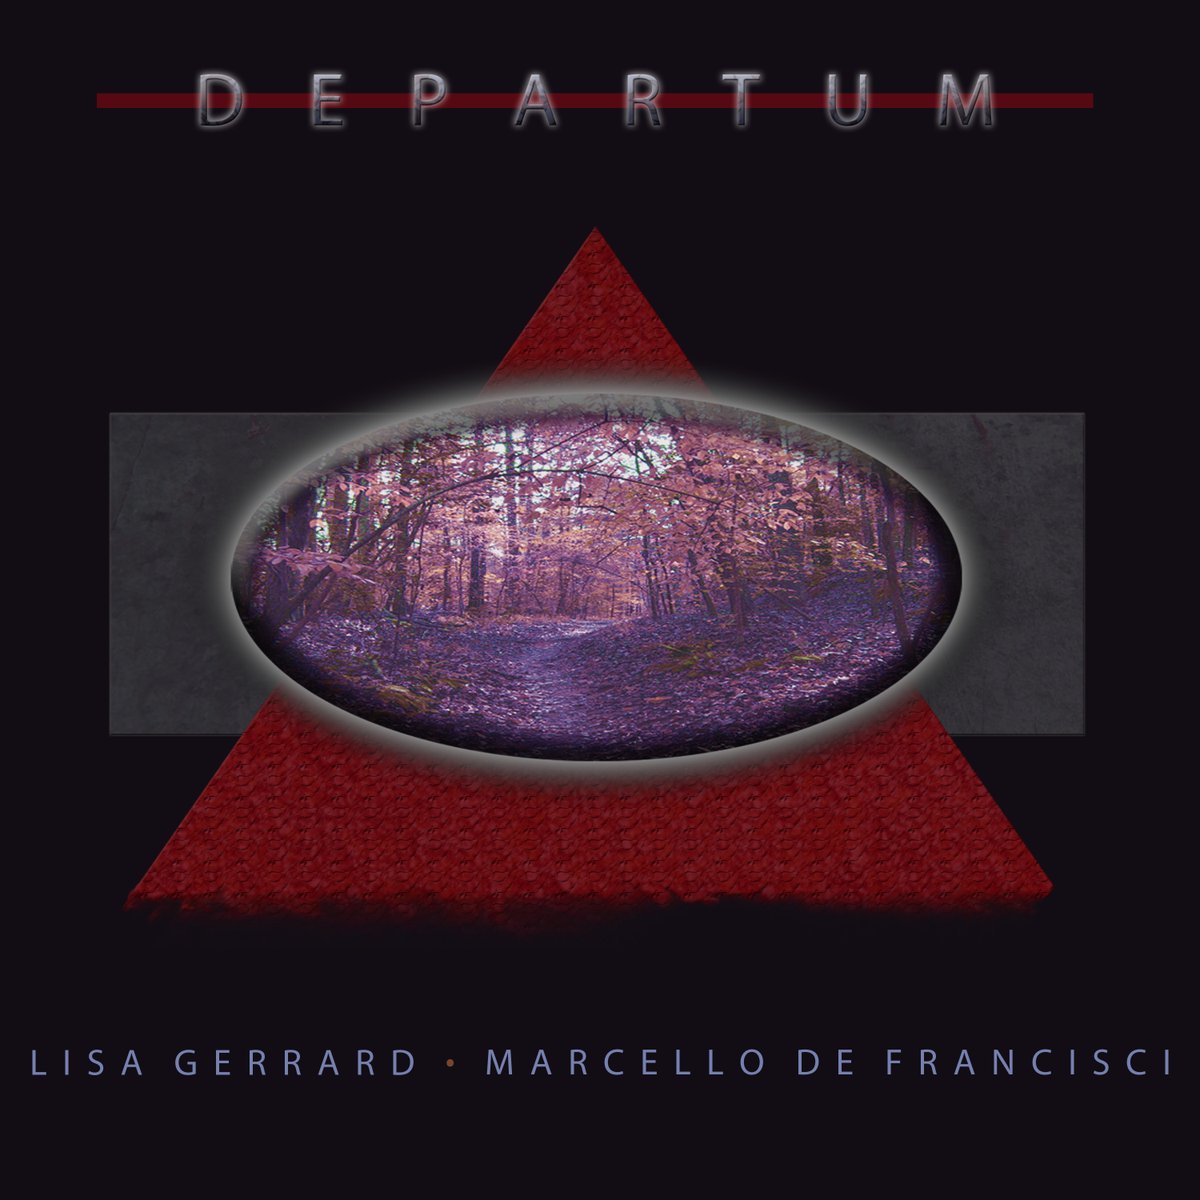 ‘Departum’, the 2010 album by @Lisa_Gerrard and Marcello De Francisi, is available once again from 28th April 2023 on all digital platforms. The re-release includes an extended one-hour meditation bonus version of ‘Sacred Journey’. Listen on @Spotify bit.ly/3oHGzRw